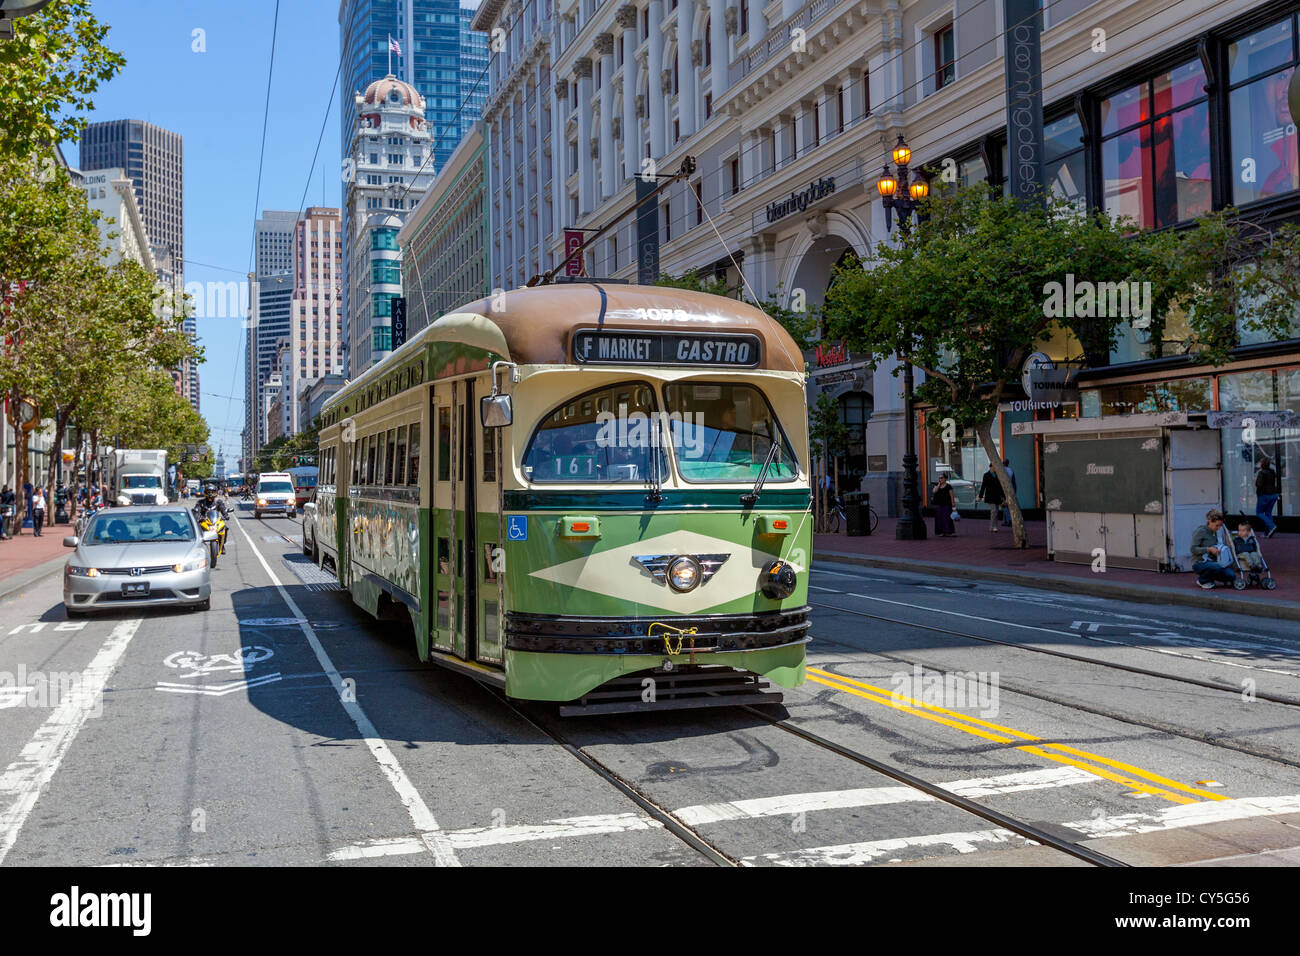 The MUNI public transportation and cable car system in San Francisco, California. Stock Photo